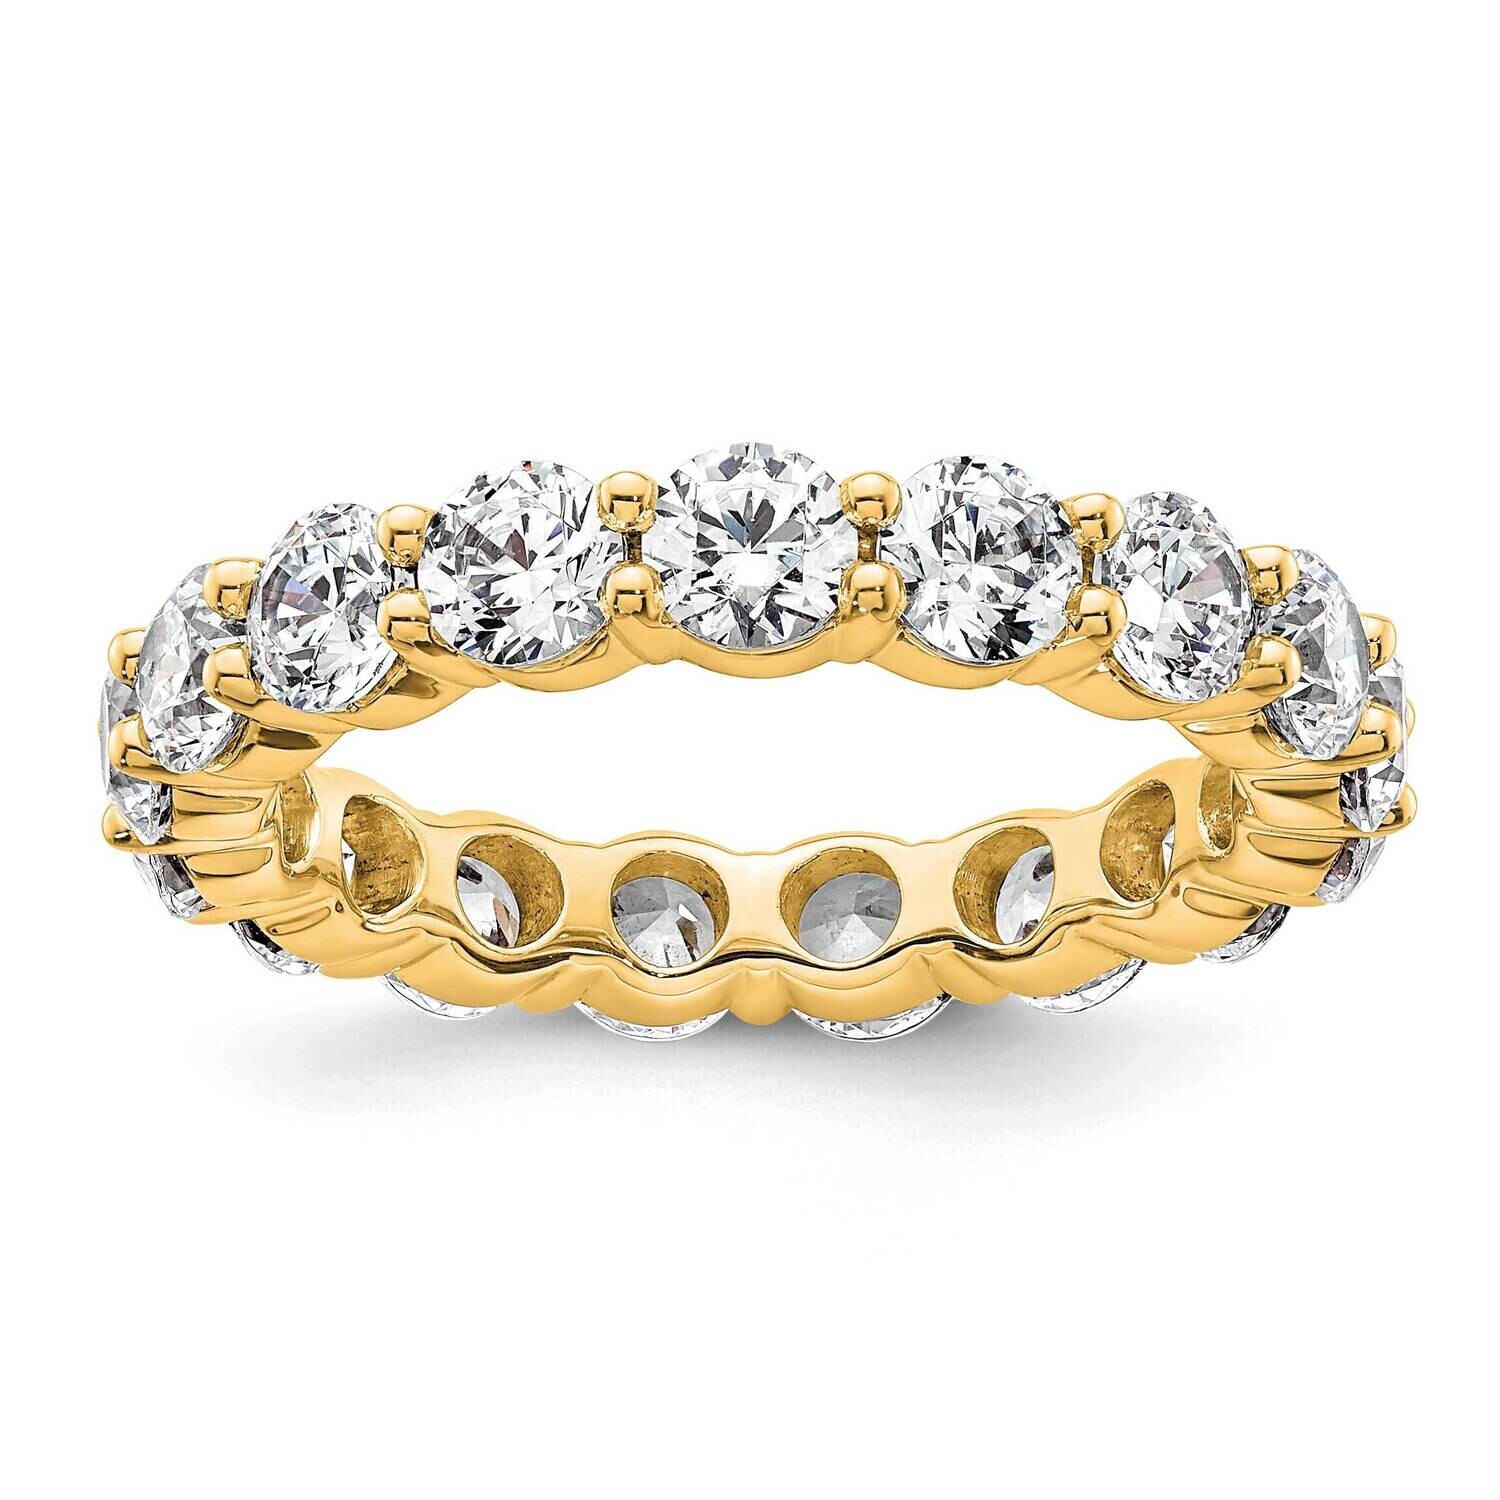 Shared Prong 4 Carat Diamond Complete Eternity Band 14k Polished Gold ET0001-400-8Y4